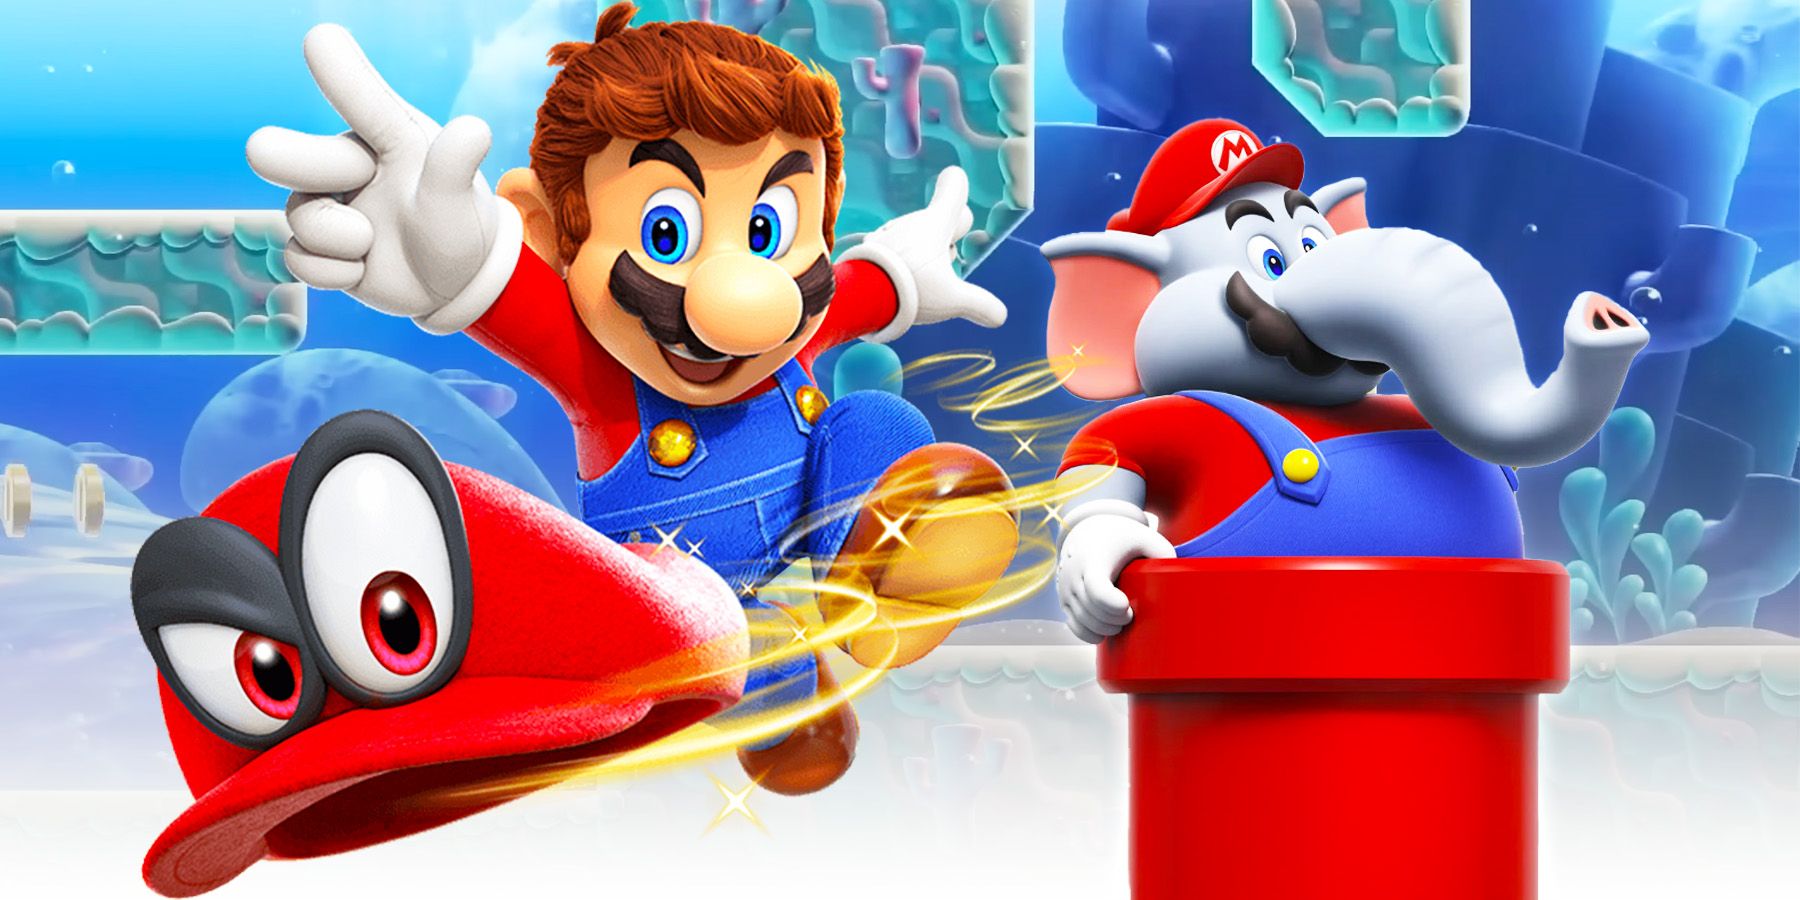 Elephant Mario From Super Mario Bros. Wonder Emerges From A Pipe, And Mario And Cappy From Super Mario Odyssey Spring Into Action.